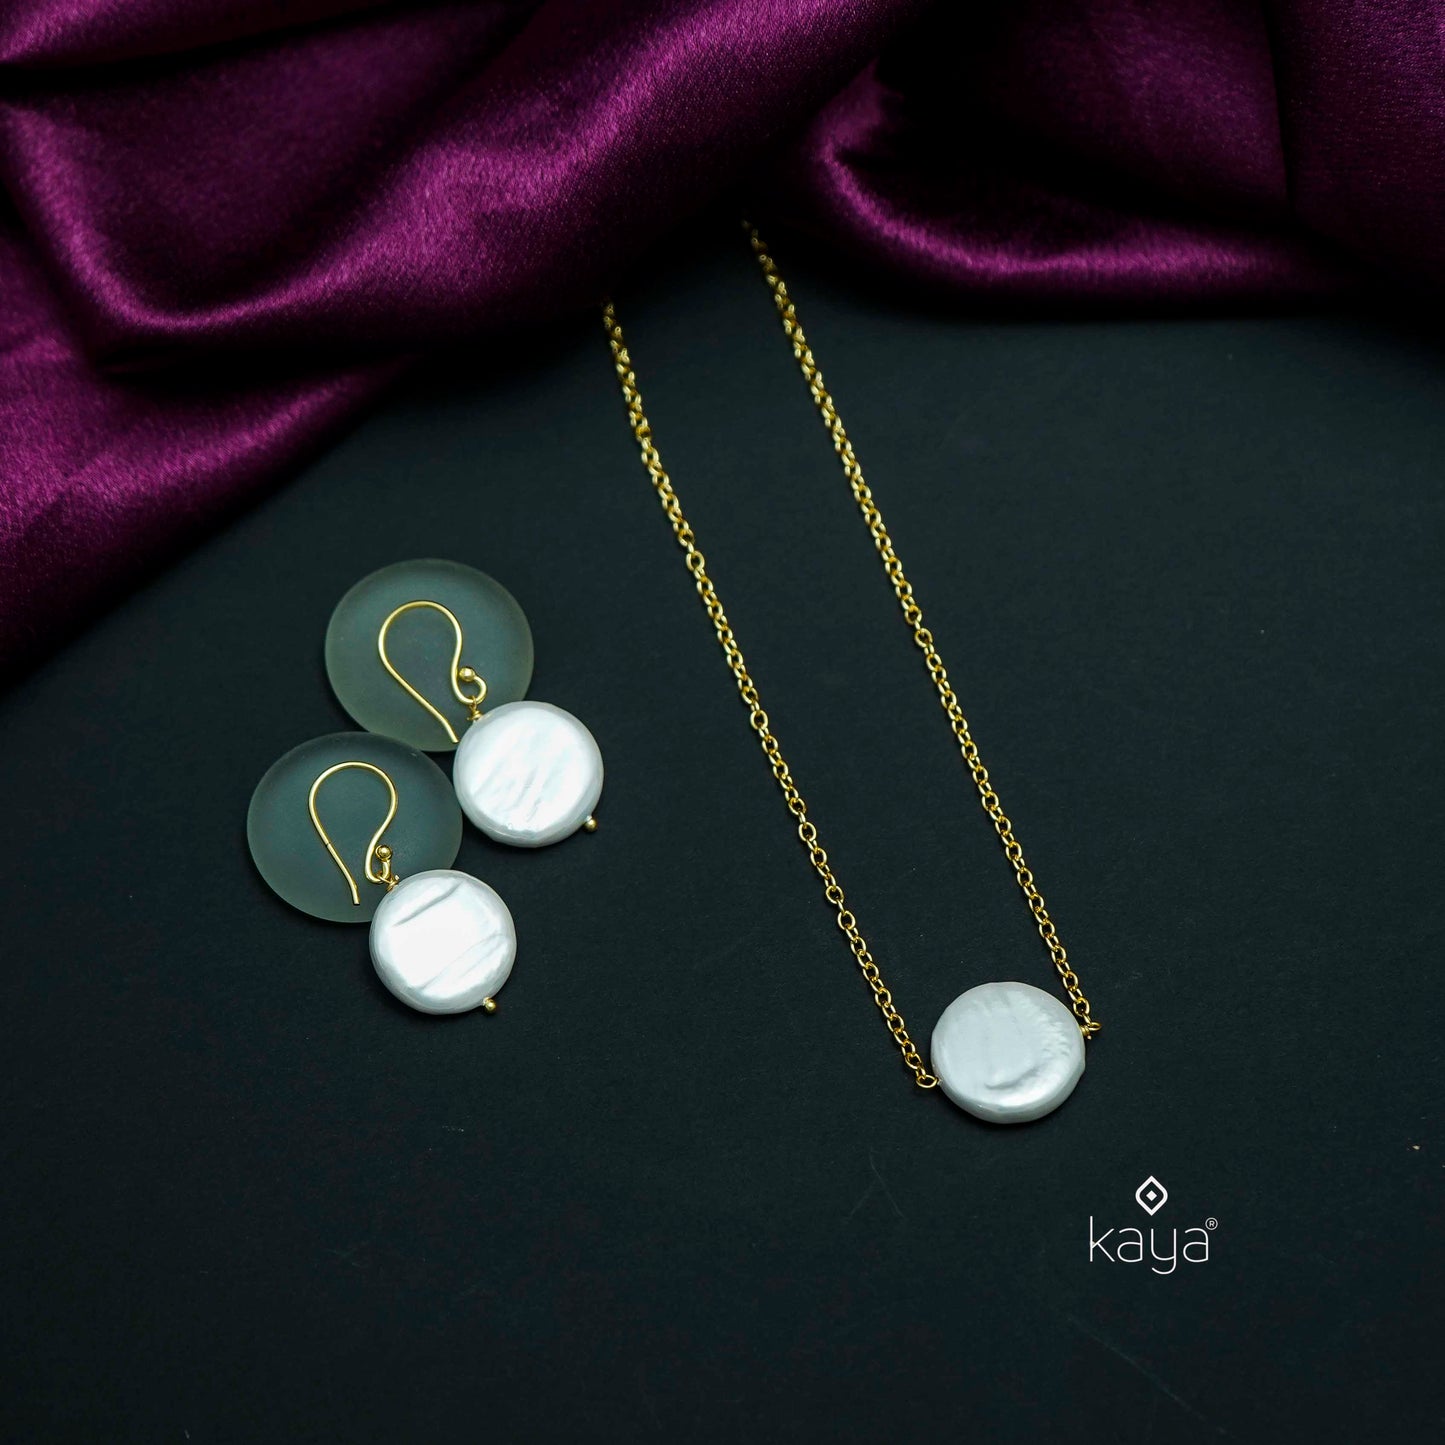 AS101228 - Simple Pearl pendant Necklace set